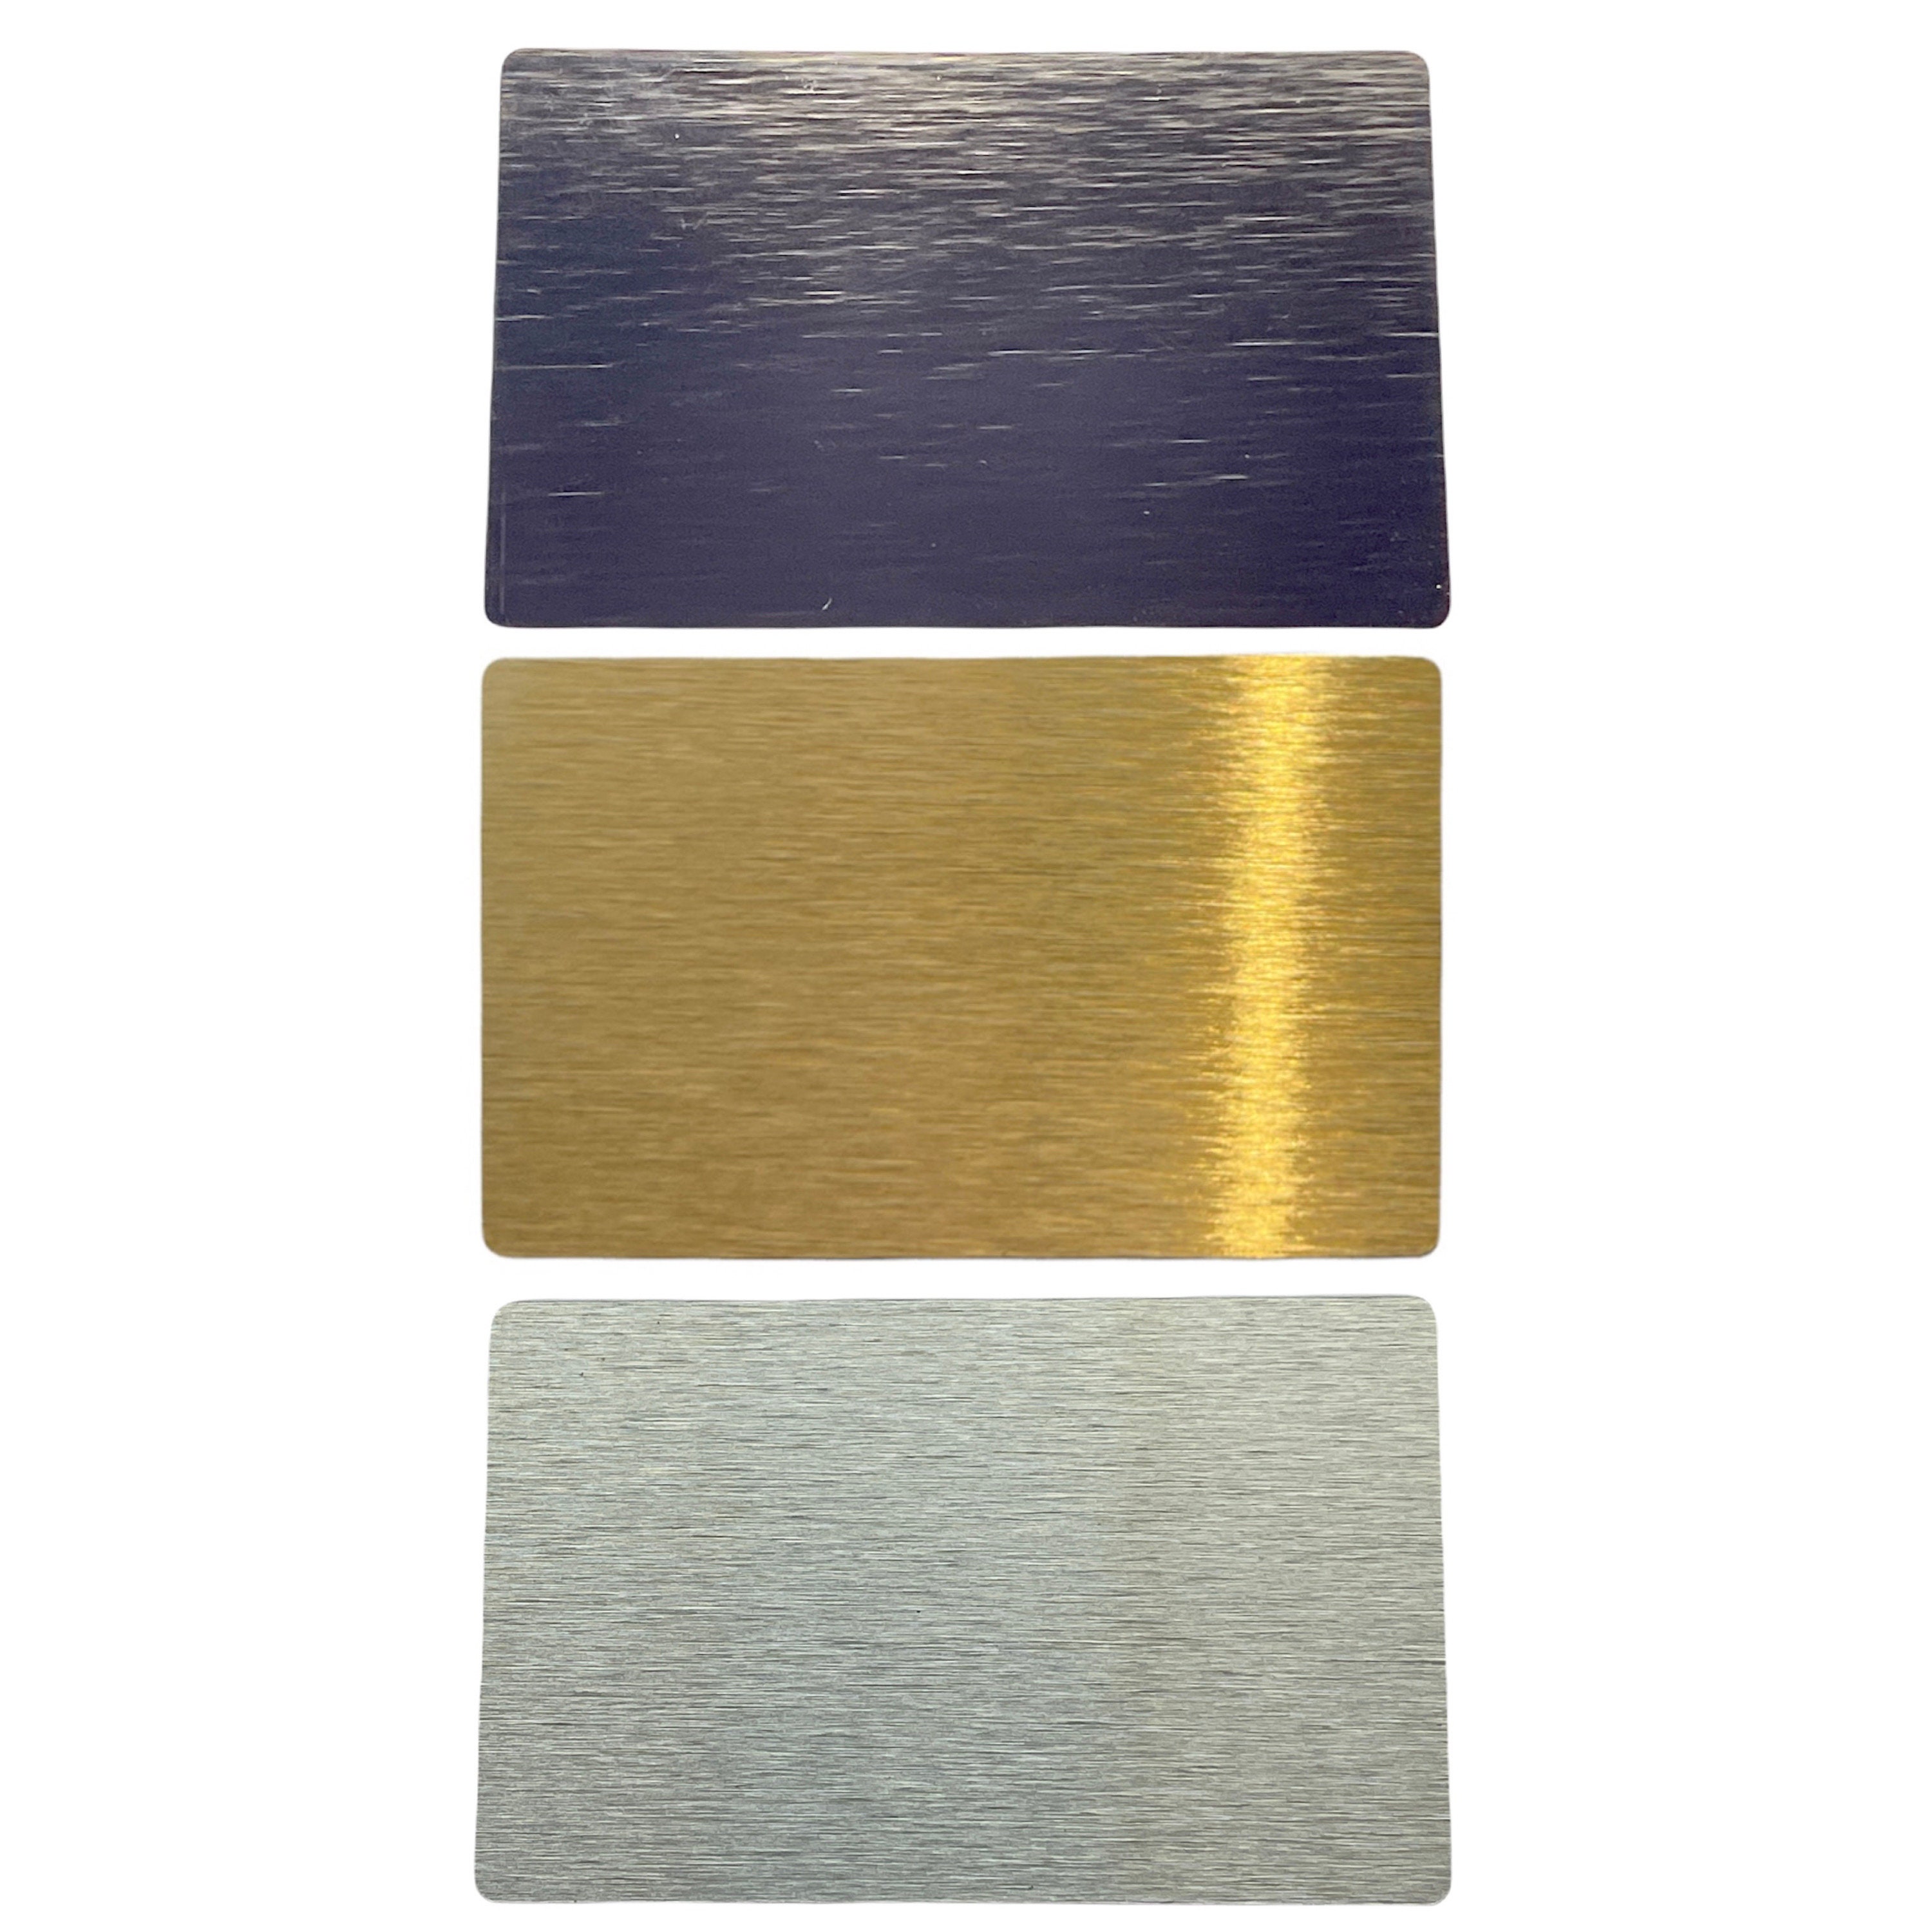 2pcs Sublimation Metal Blanks 4x6 Inch Aluminum Old Gold